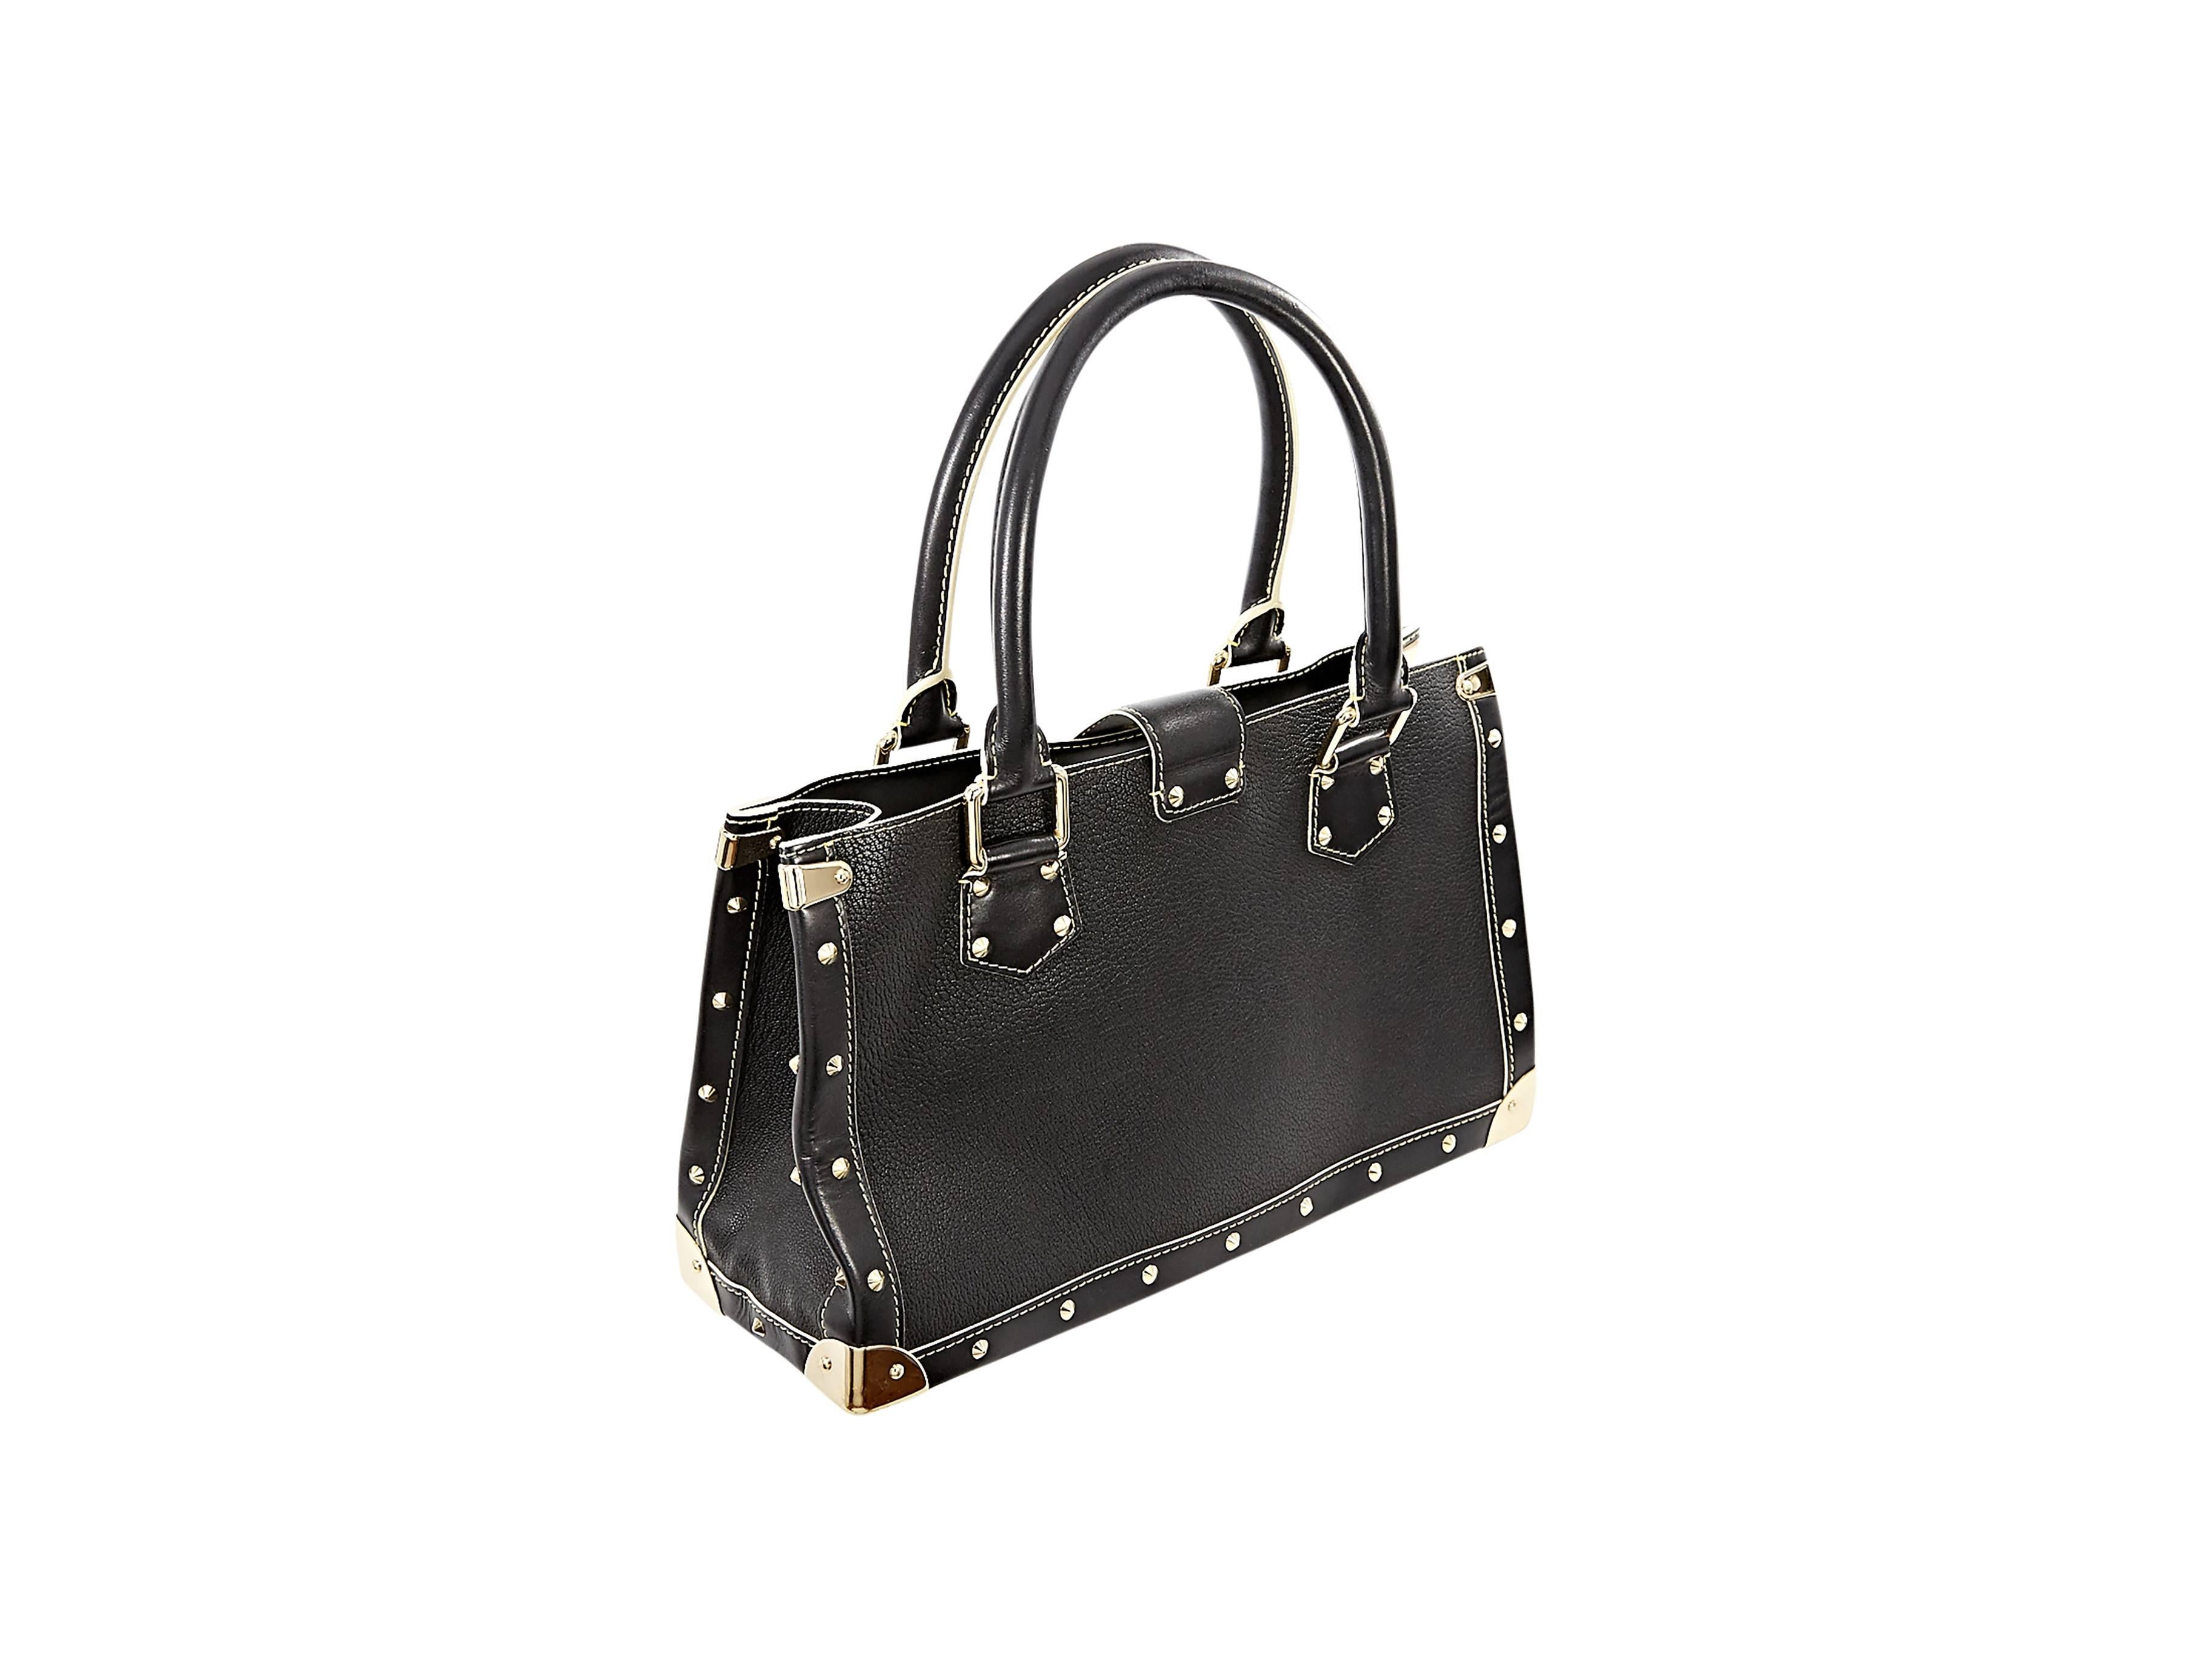 Black leather tote bag trimmed with studs by Louis Vuitton.  Dual carry handles.  Top buckle strap with lock and key closure.  Front zip pocket.  Lined interior with two inner compartments. Inner zip divider pocket and open pockets.  Goldtone